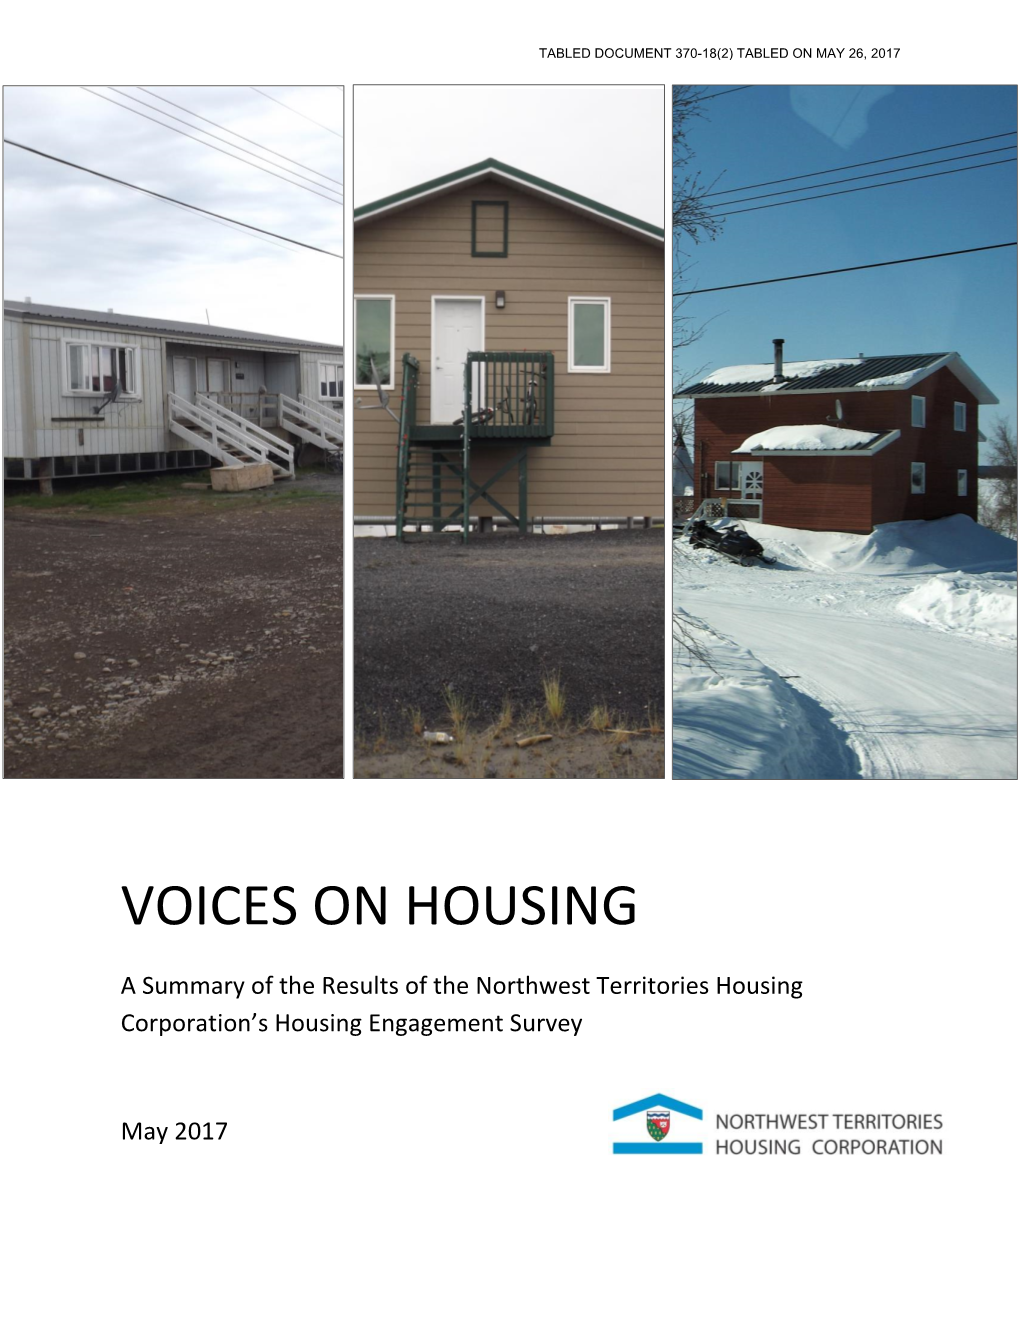 Voices on Housing